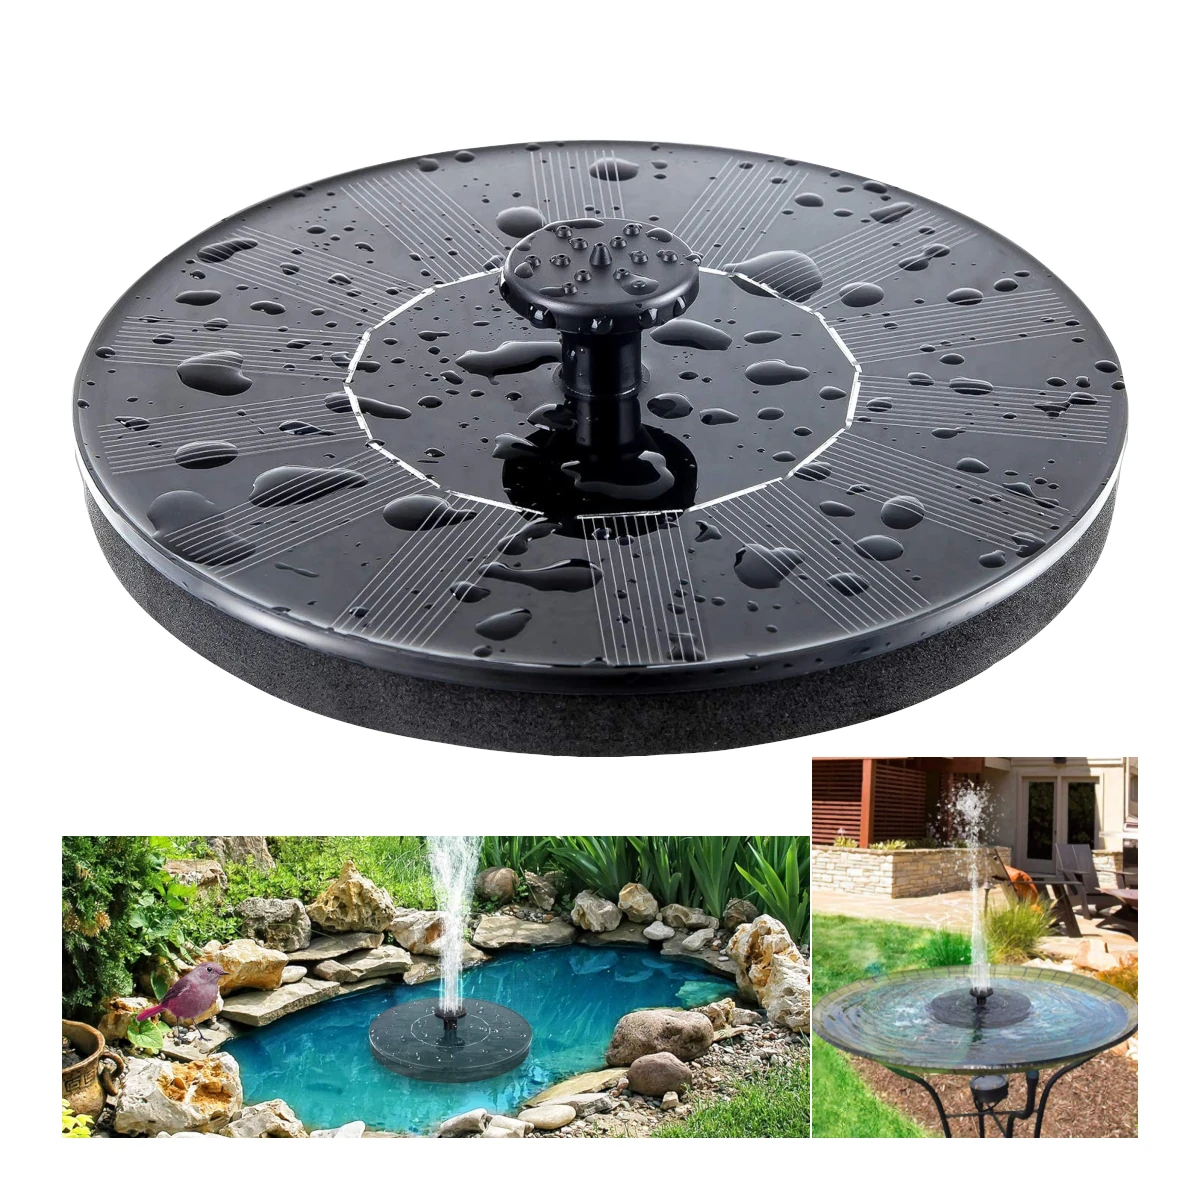 Solar Bird Bath and Home Decor Fountain Pump, with 4 Nozzle, Free Standing Floating Solar Powered Wa